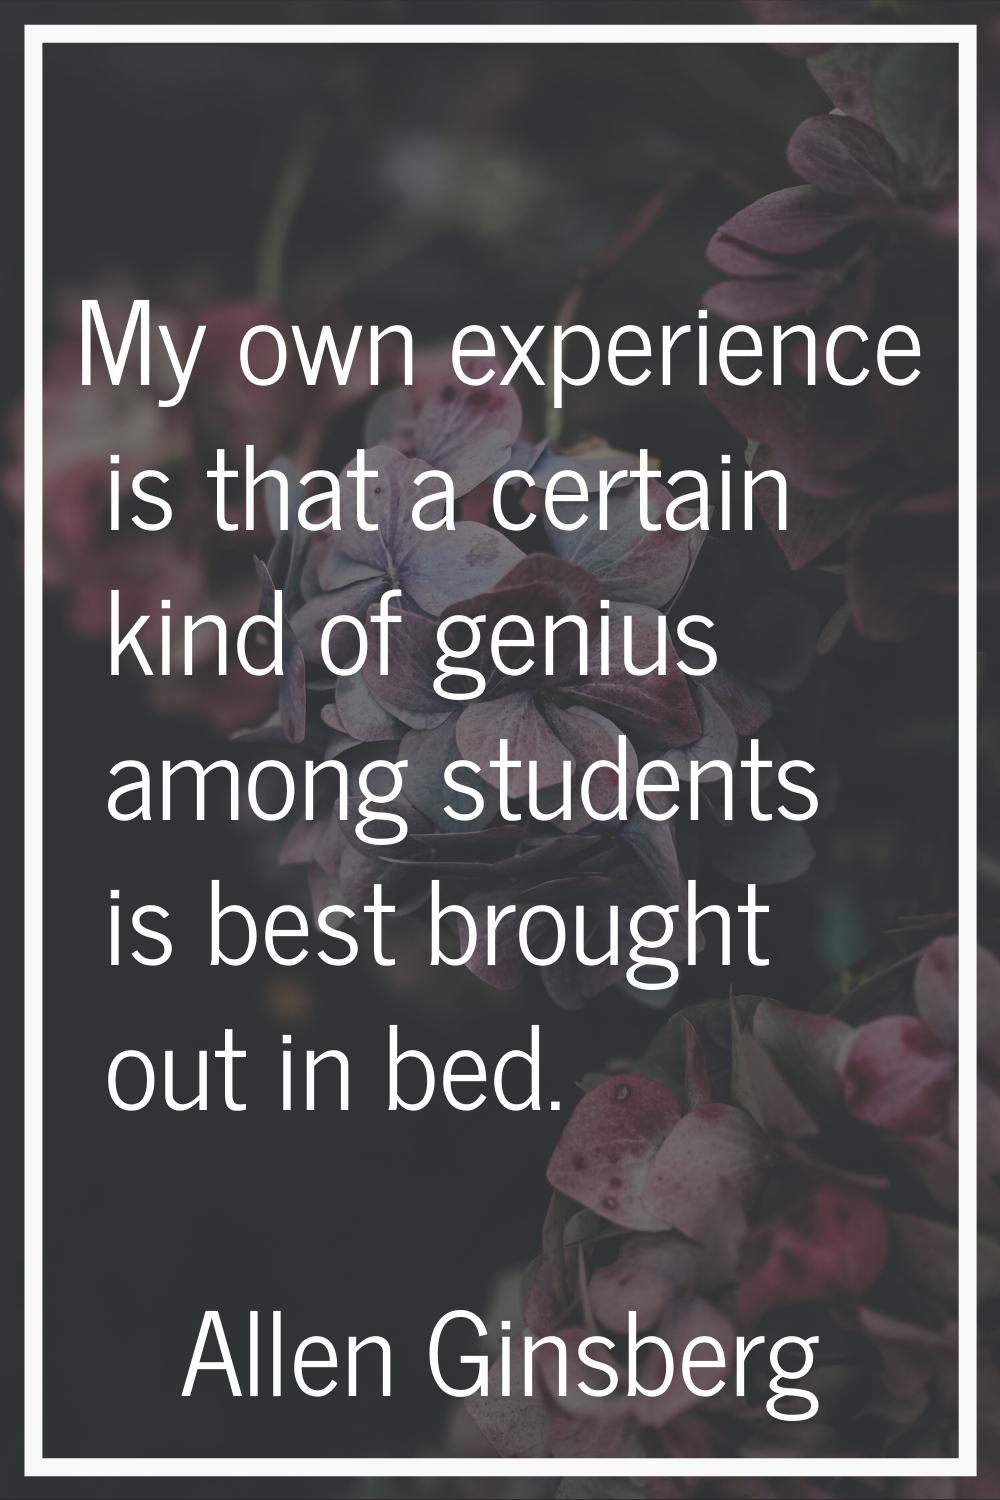 My own experience is that a certain kind of genius among students is best brought out in bed.